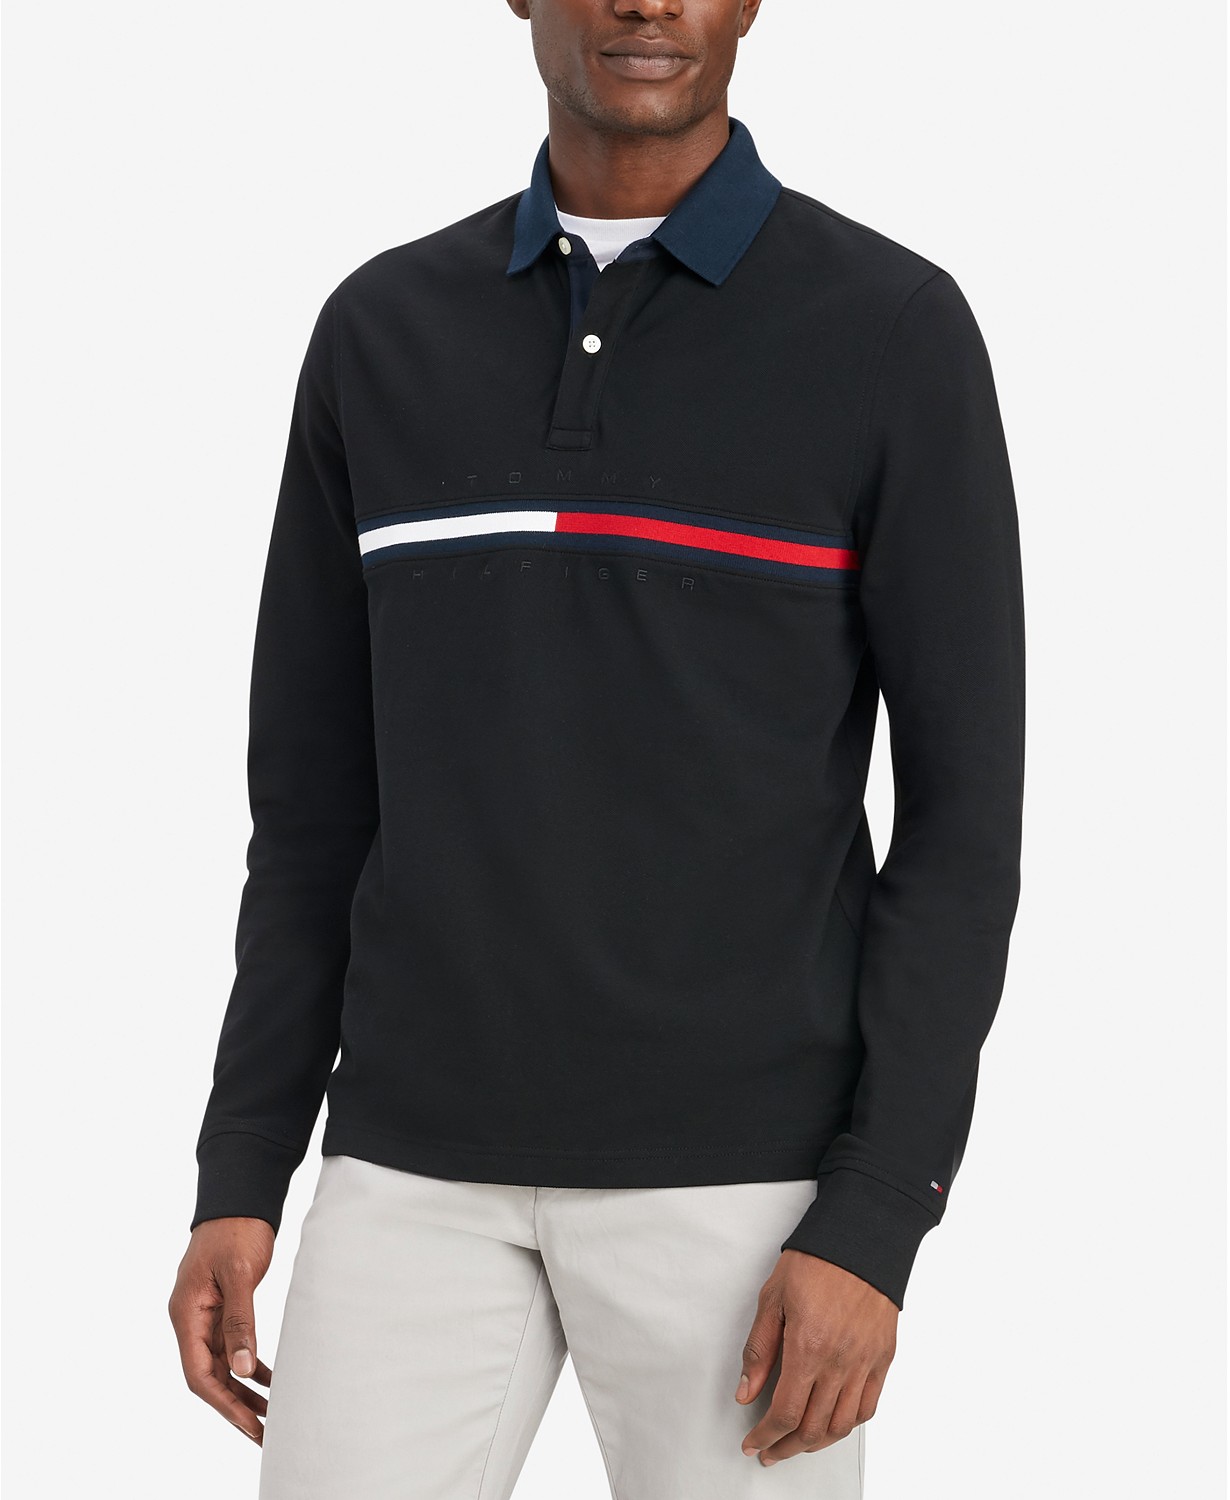 Mens Big and Tall Tanner Long Sleeve Custom-Fit Polo Shirt